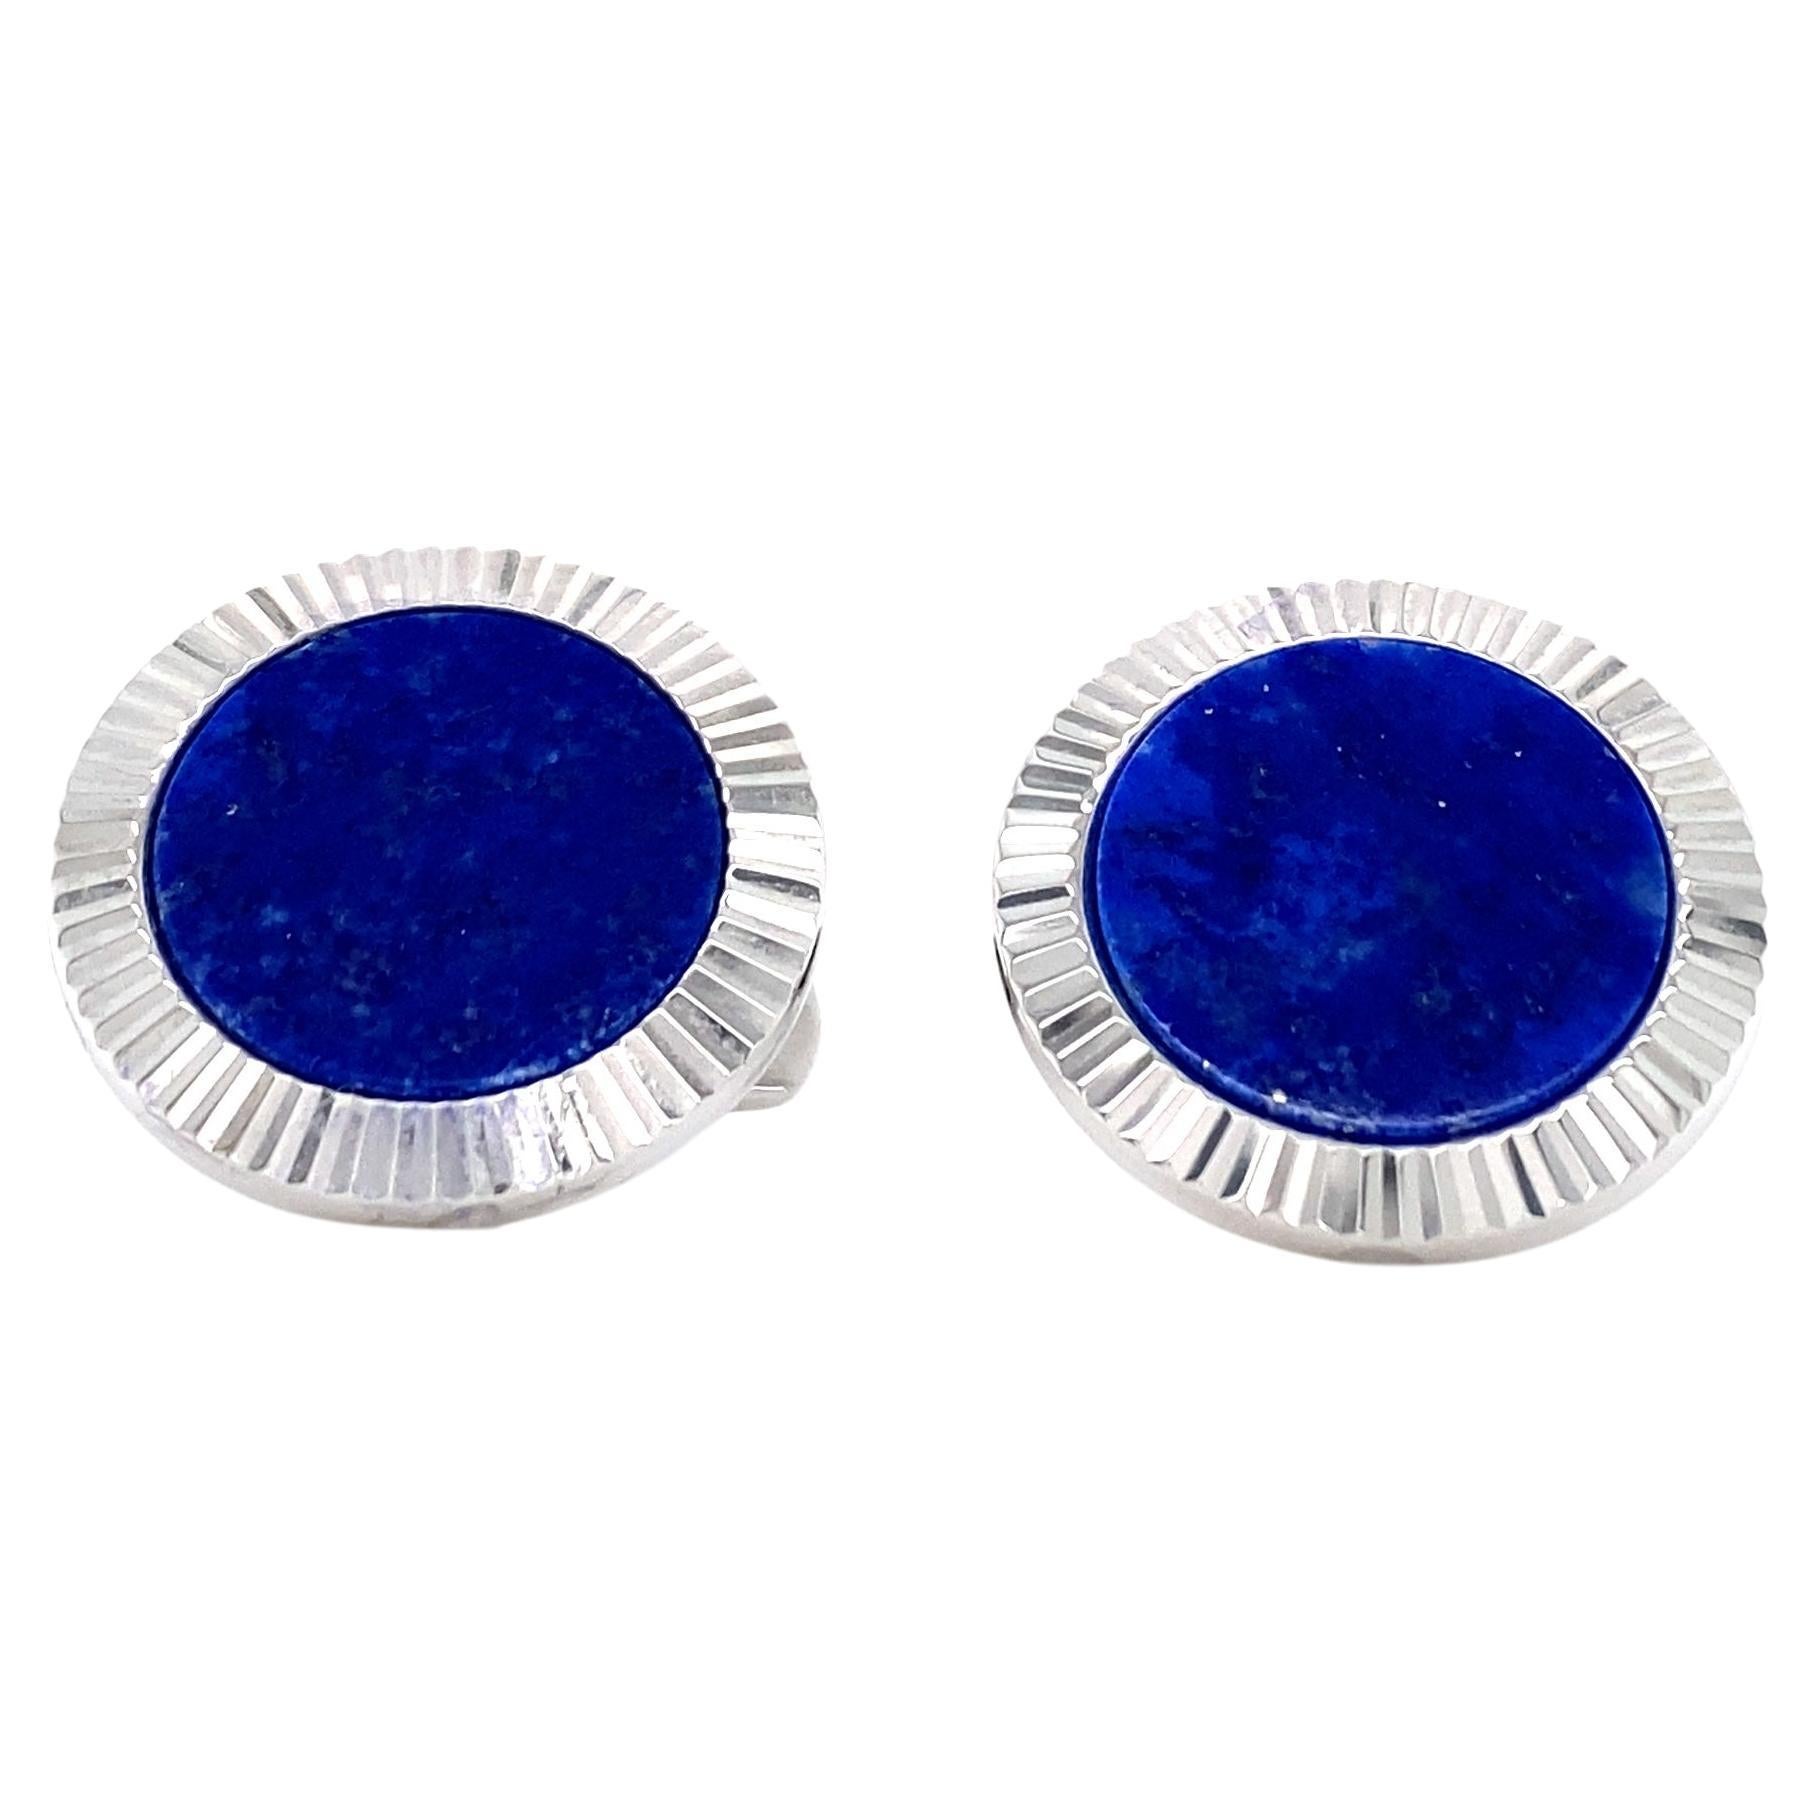 Fluted Round Lapis Lazuli Cufflinks in Solid 925 Sterling Silver, Rhodium Plated